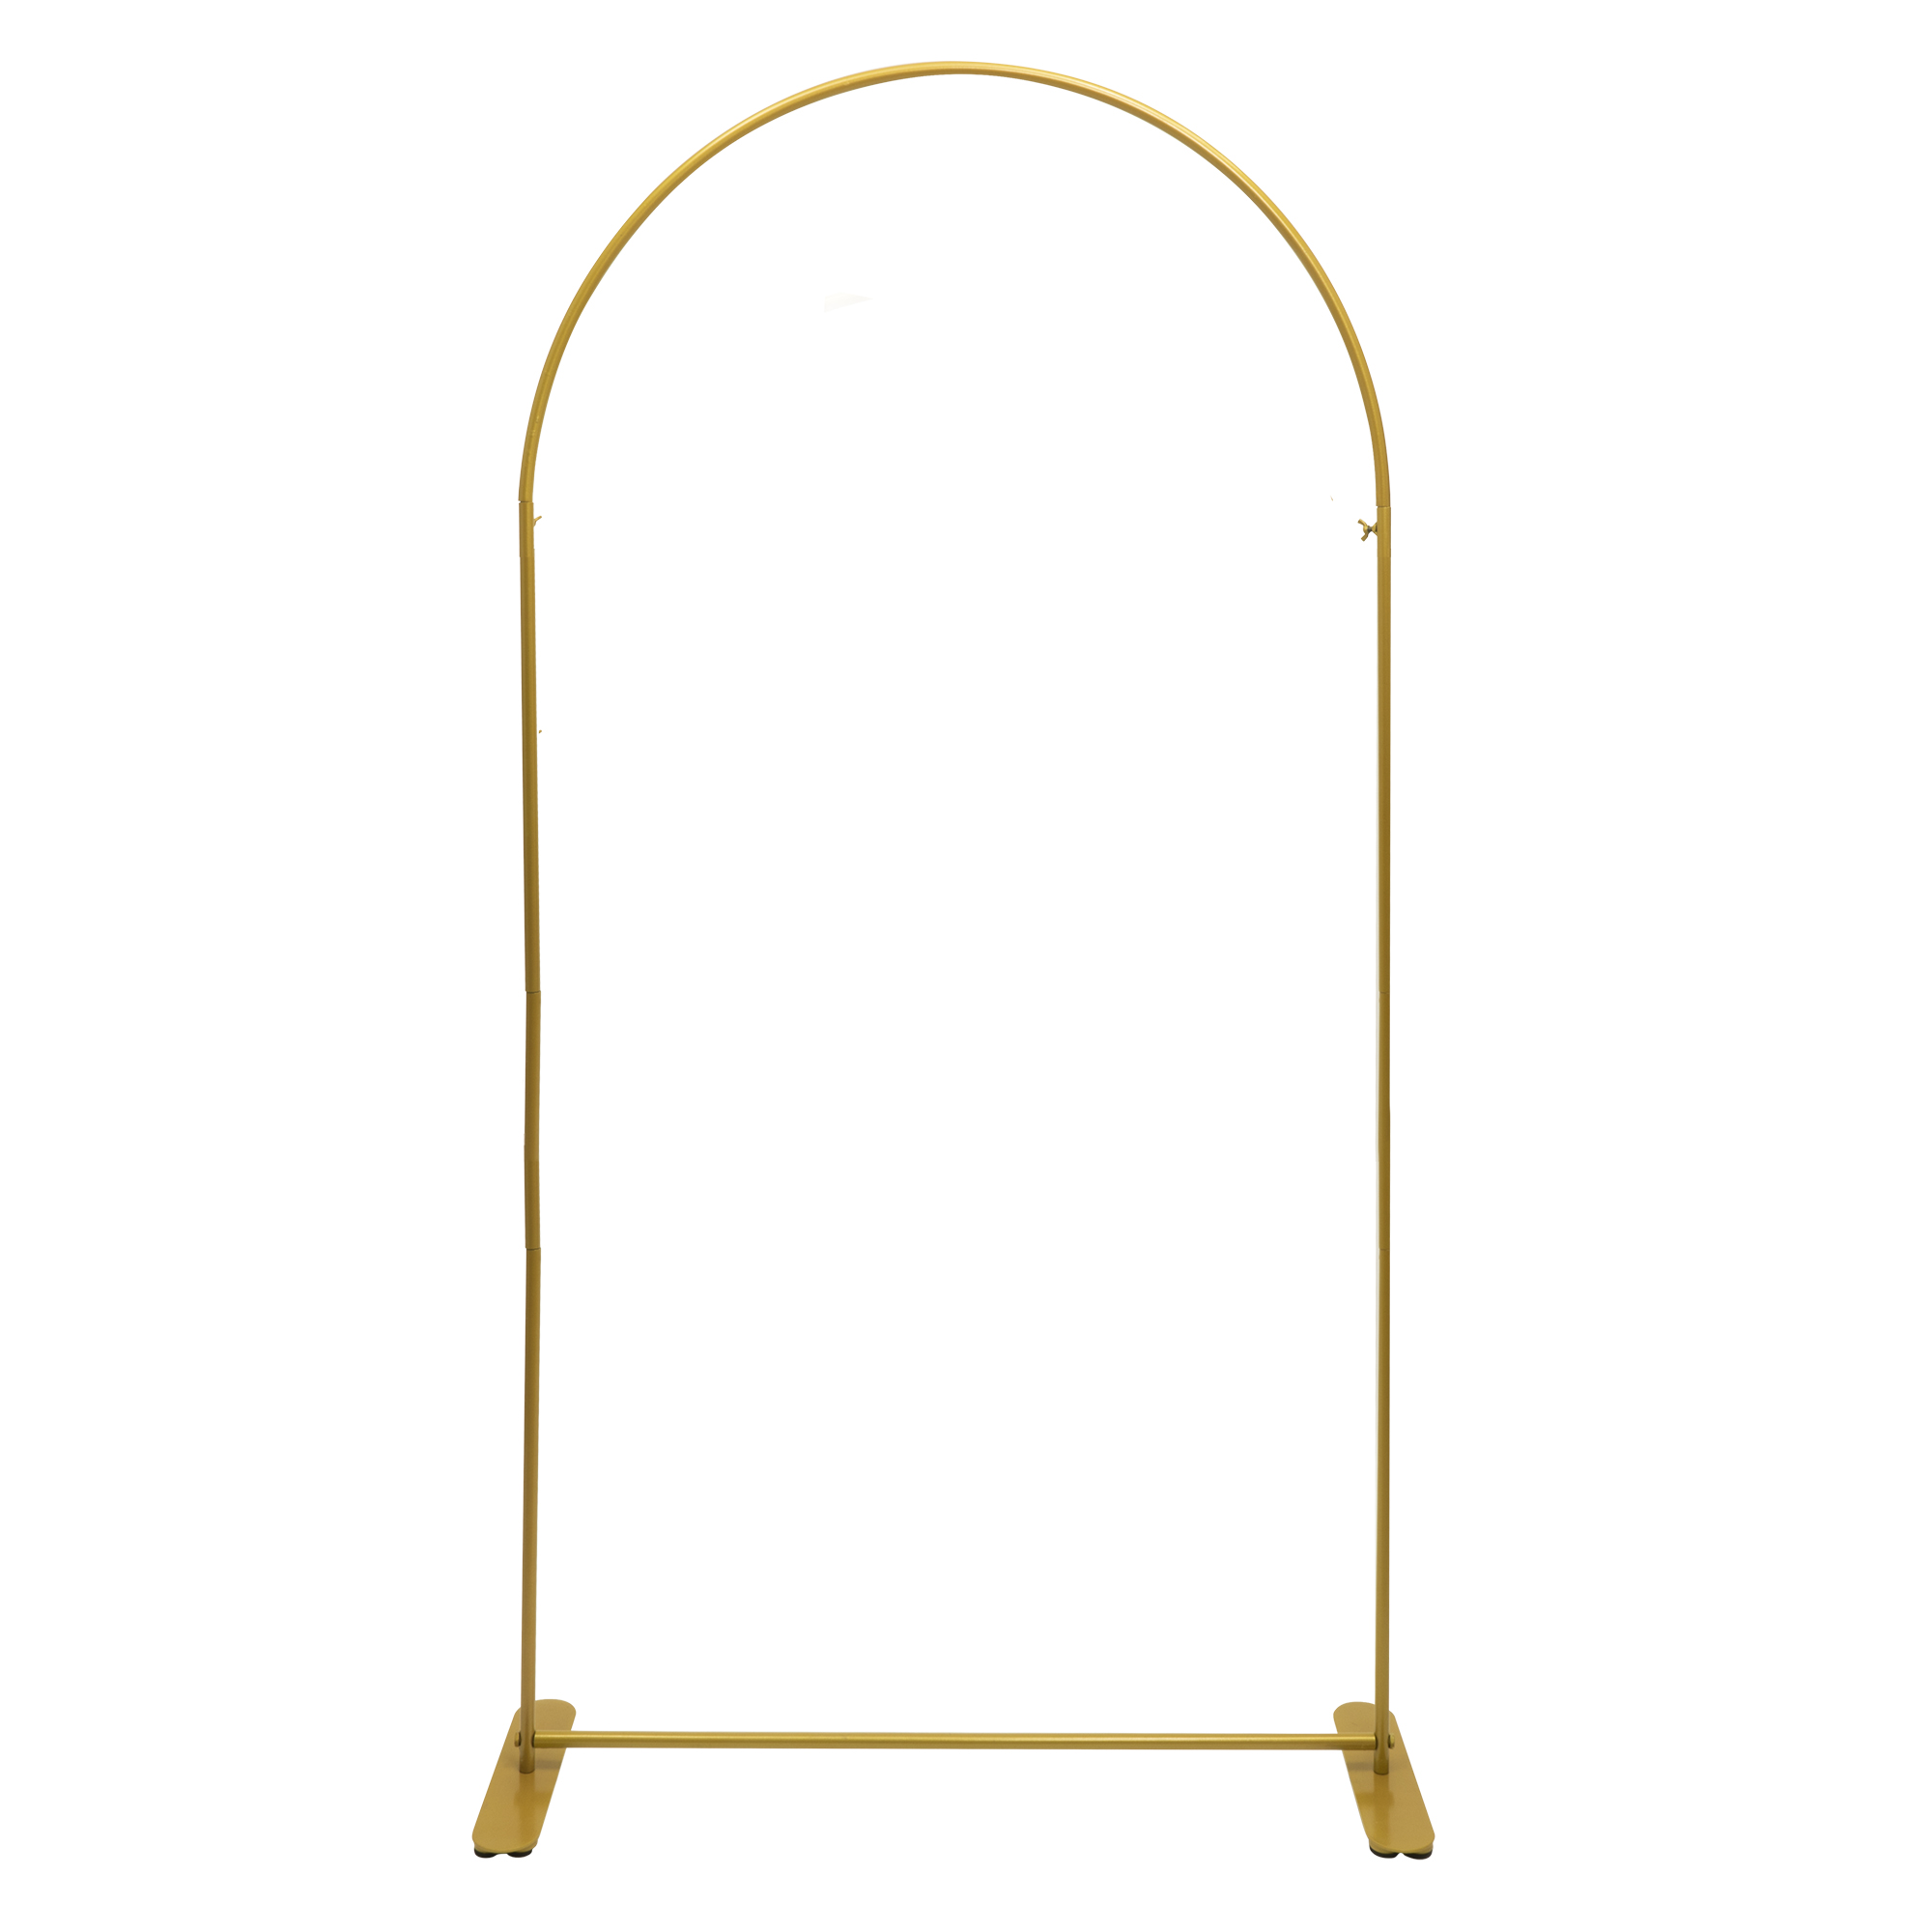 Metal Arch Backdrop Stand 36" x 72" - Gold